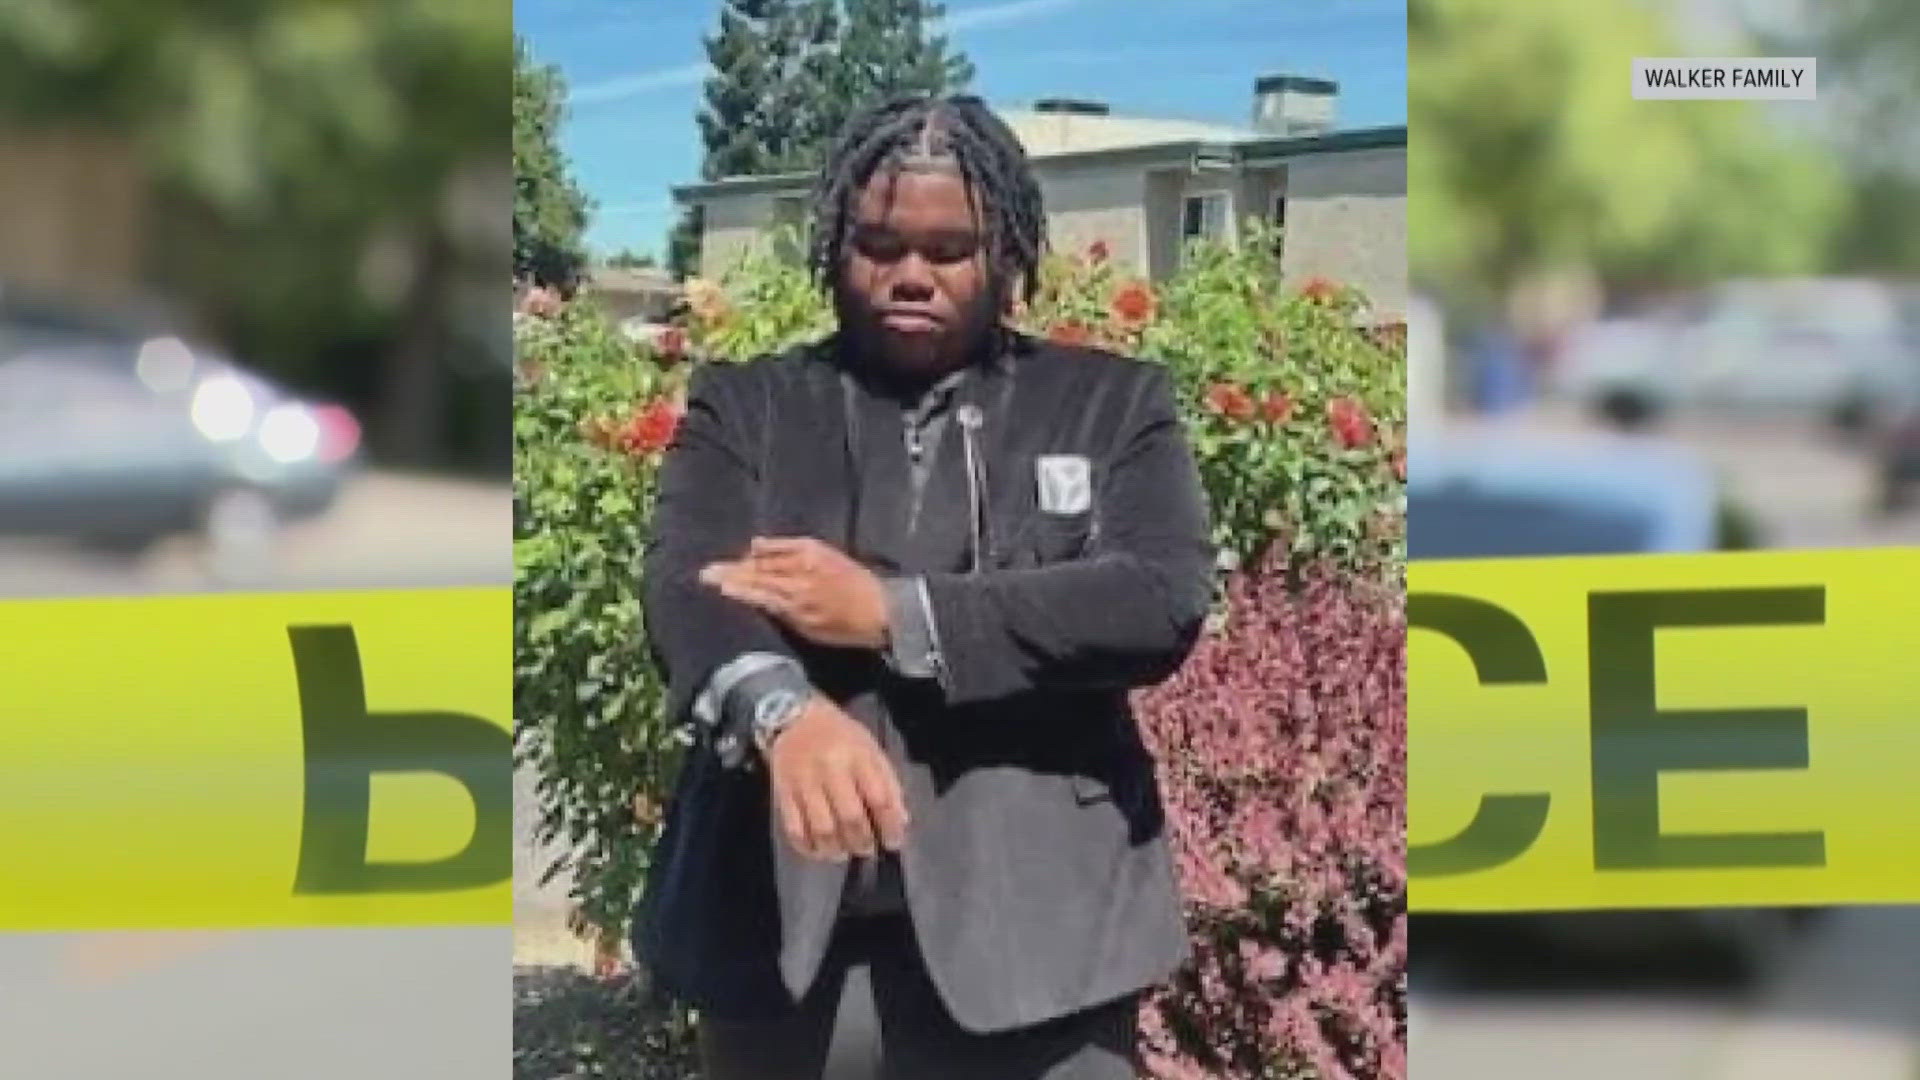 An 18-year-old killed in a shooting early Sunday morning in south Natomas has been identified as Jeremiah Walker, a Grant Union High School student.